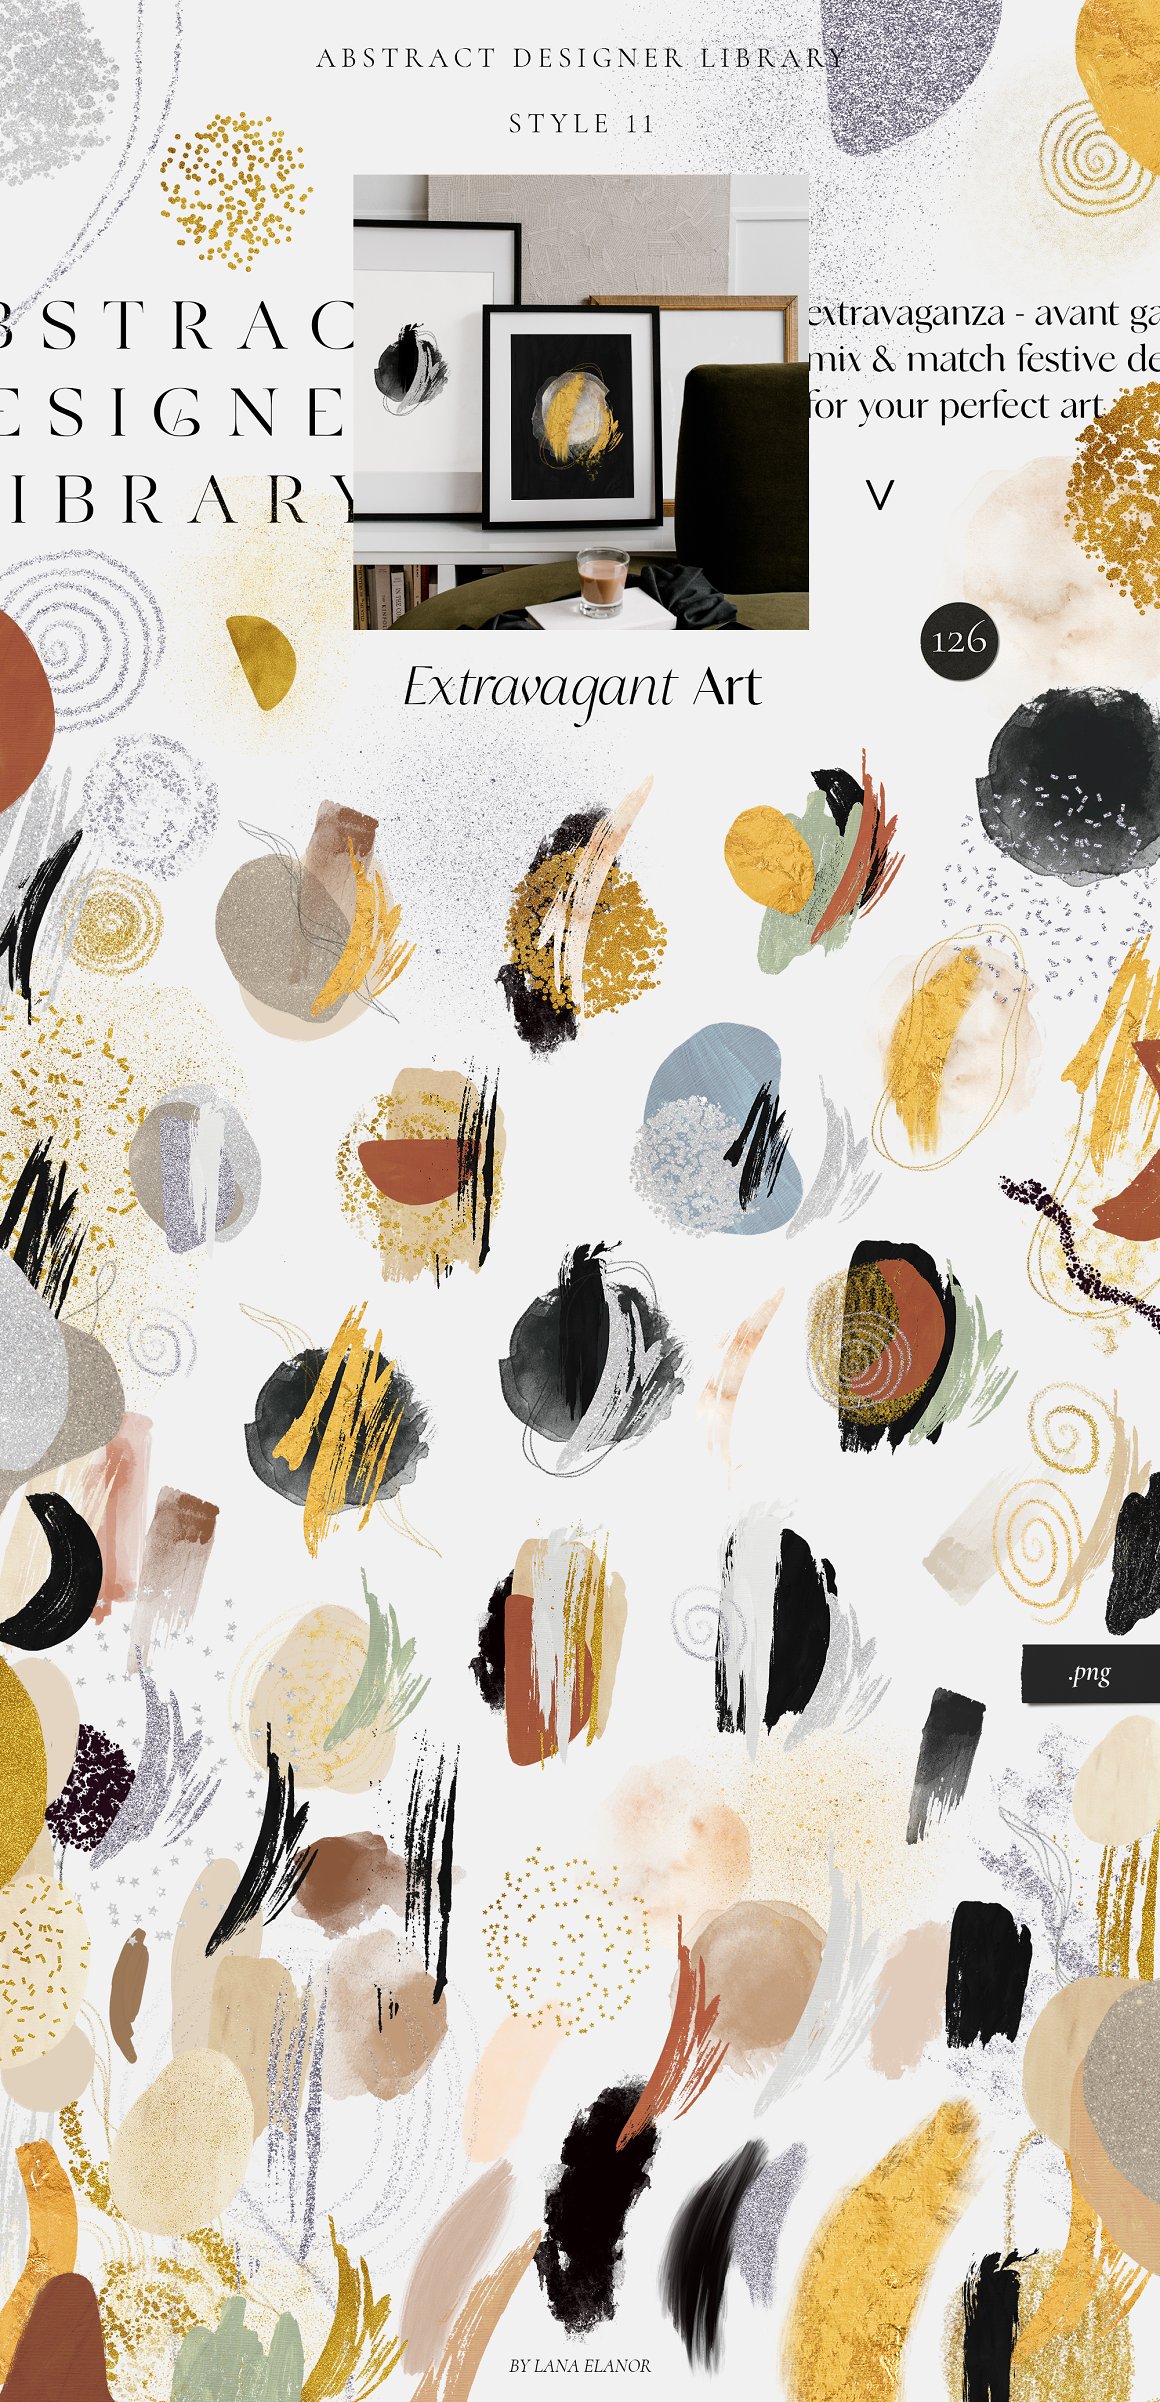 Clipart of extravagant art on a gray background.